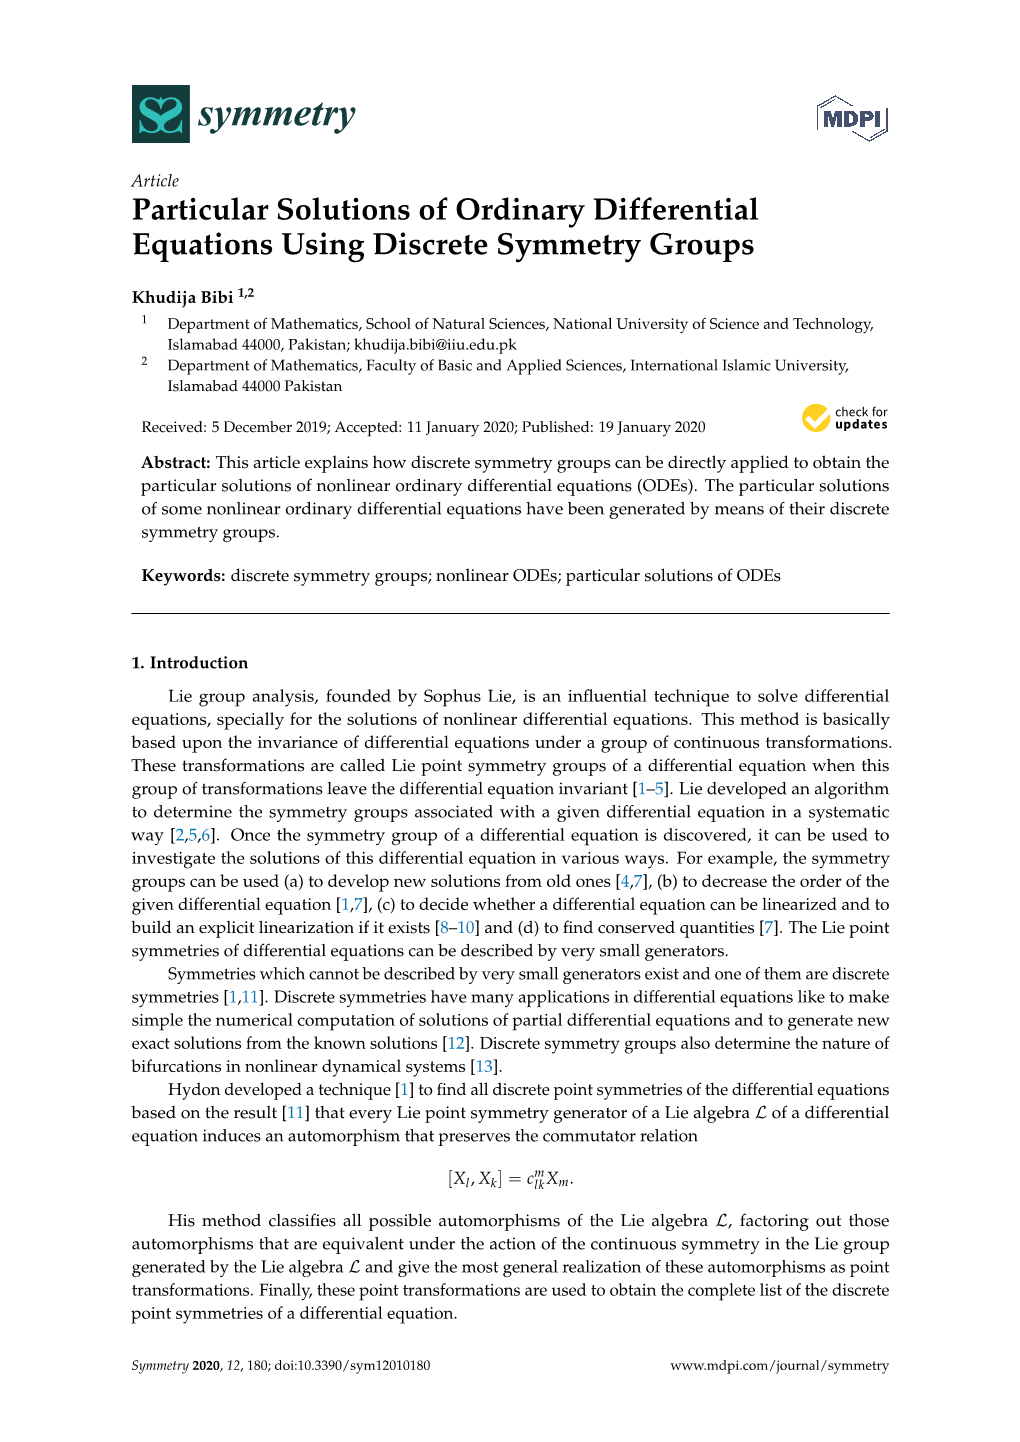 Particular Solutions of Ordinary Differential Equations Using Discrete Symmetry Groups